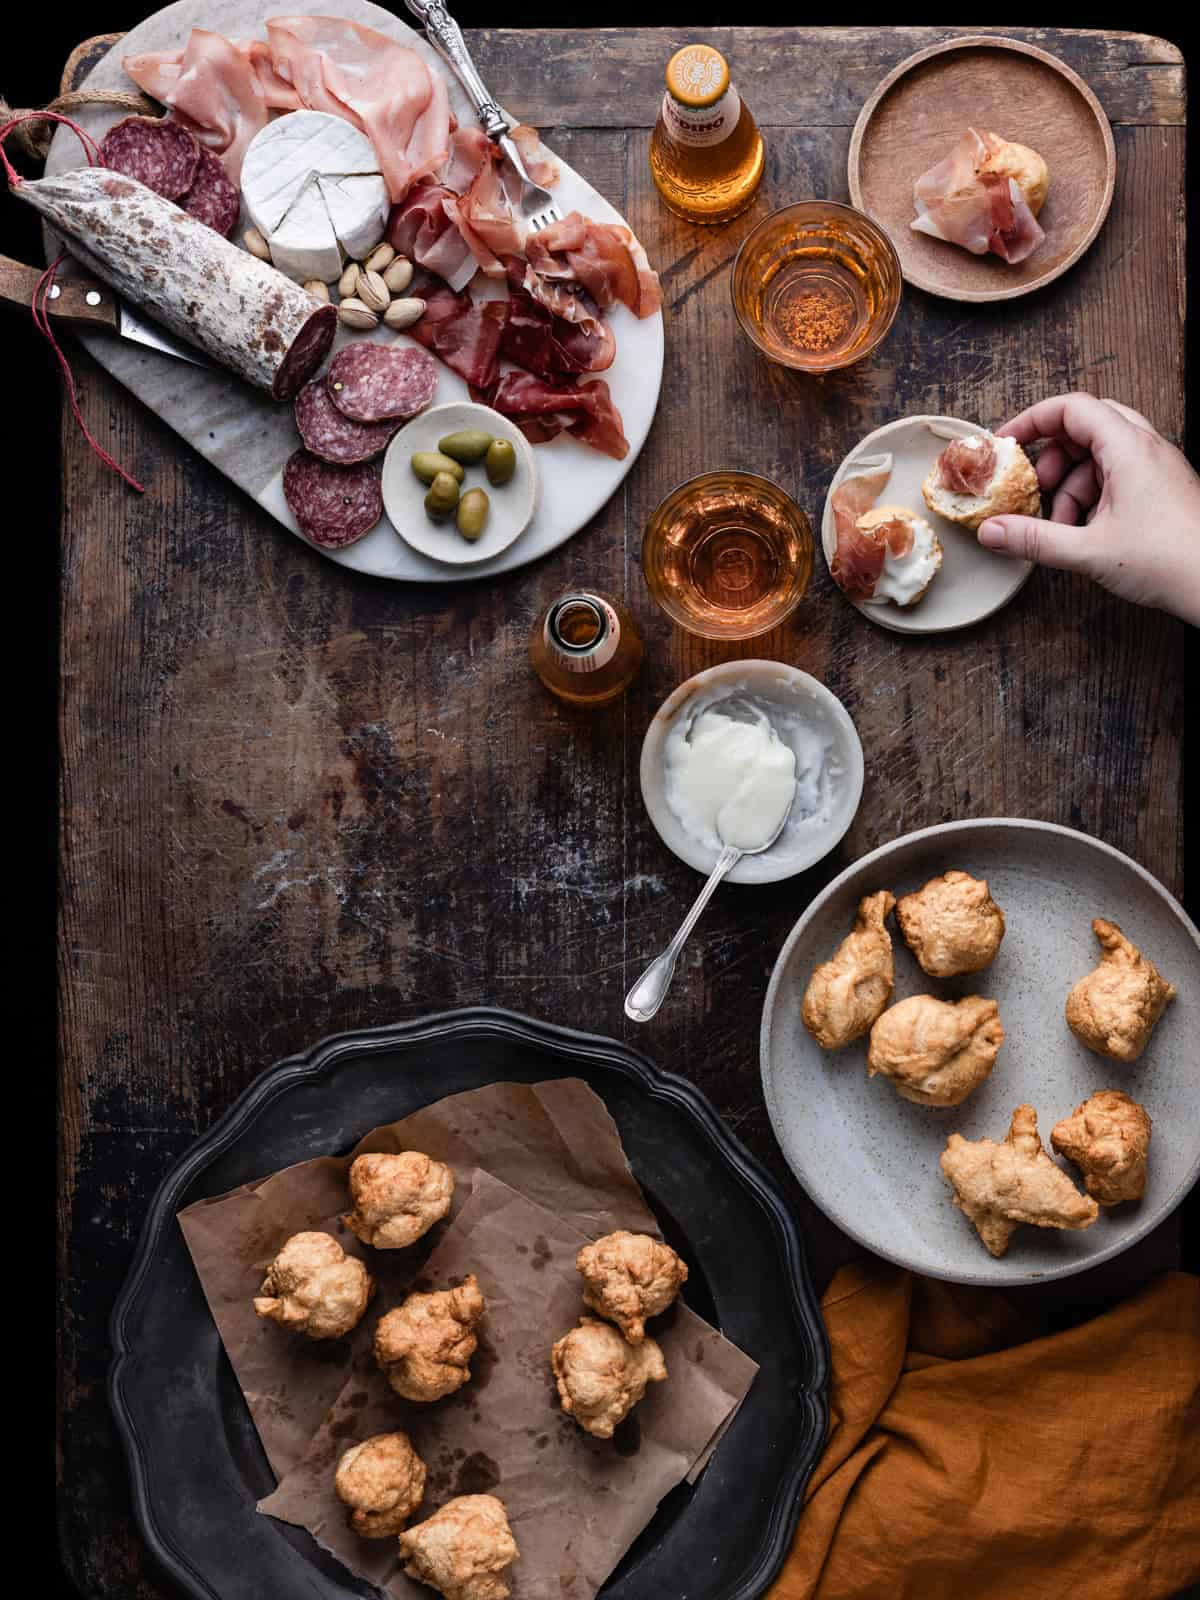 Fried coccoli on serving plate served on a table along with cheese and cured meats with hand reaching one fried bread ball stuffed with cheese and cured meat.